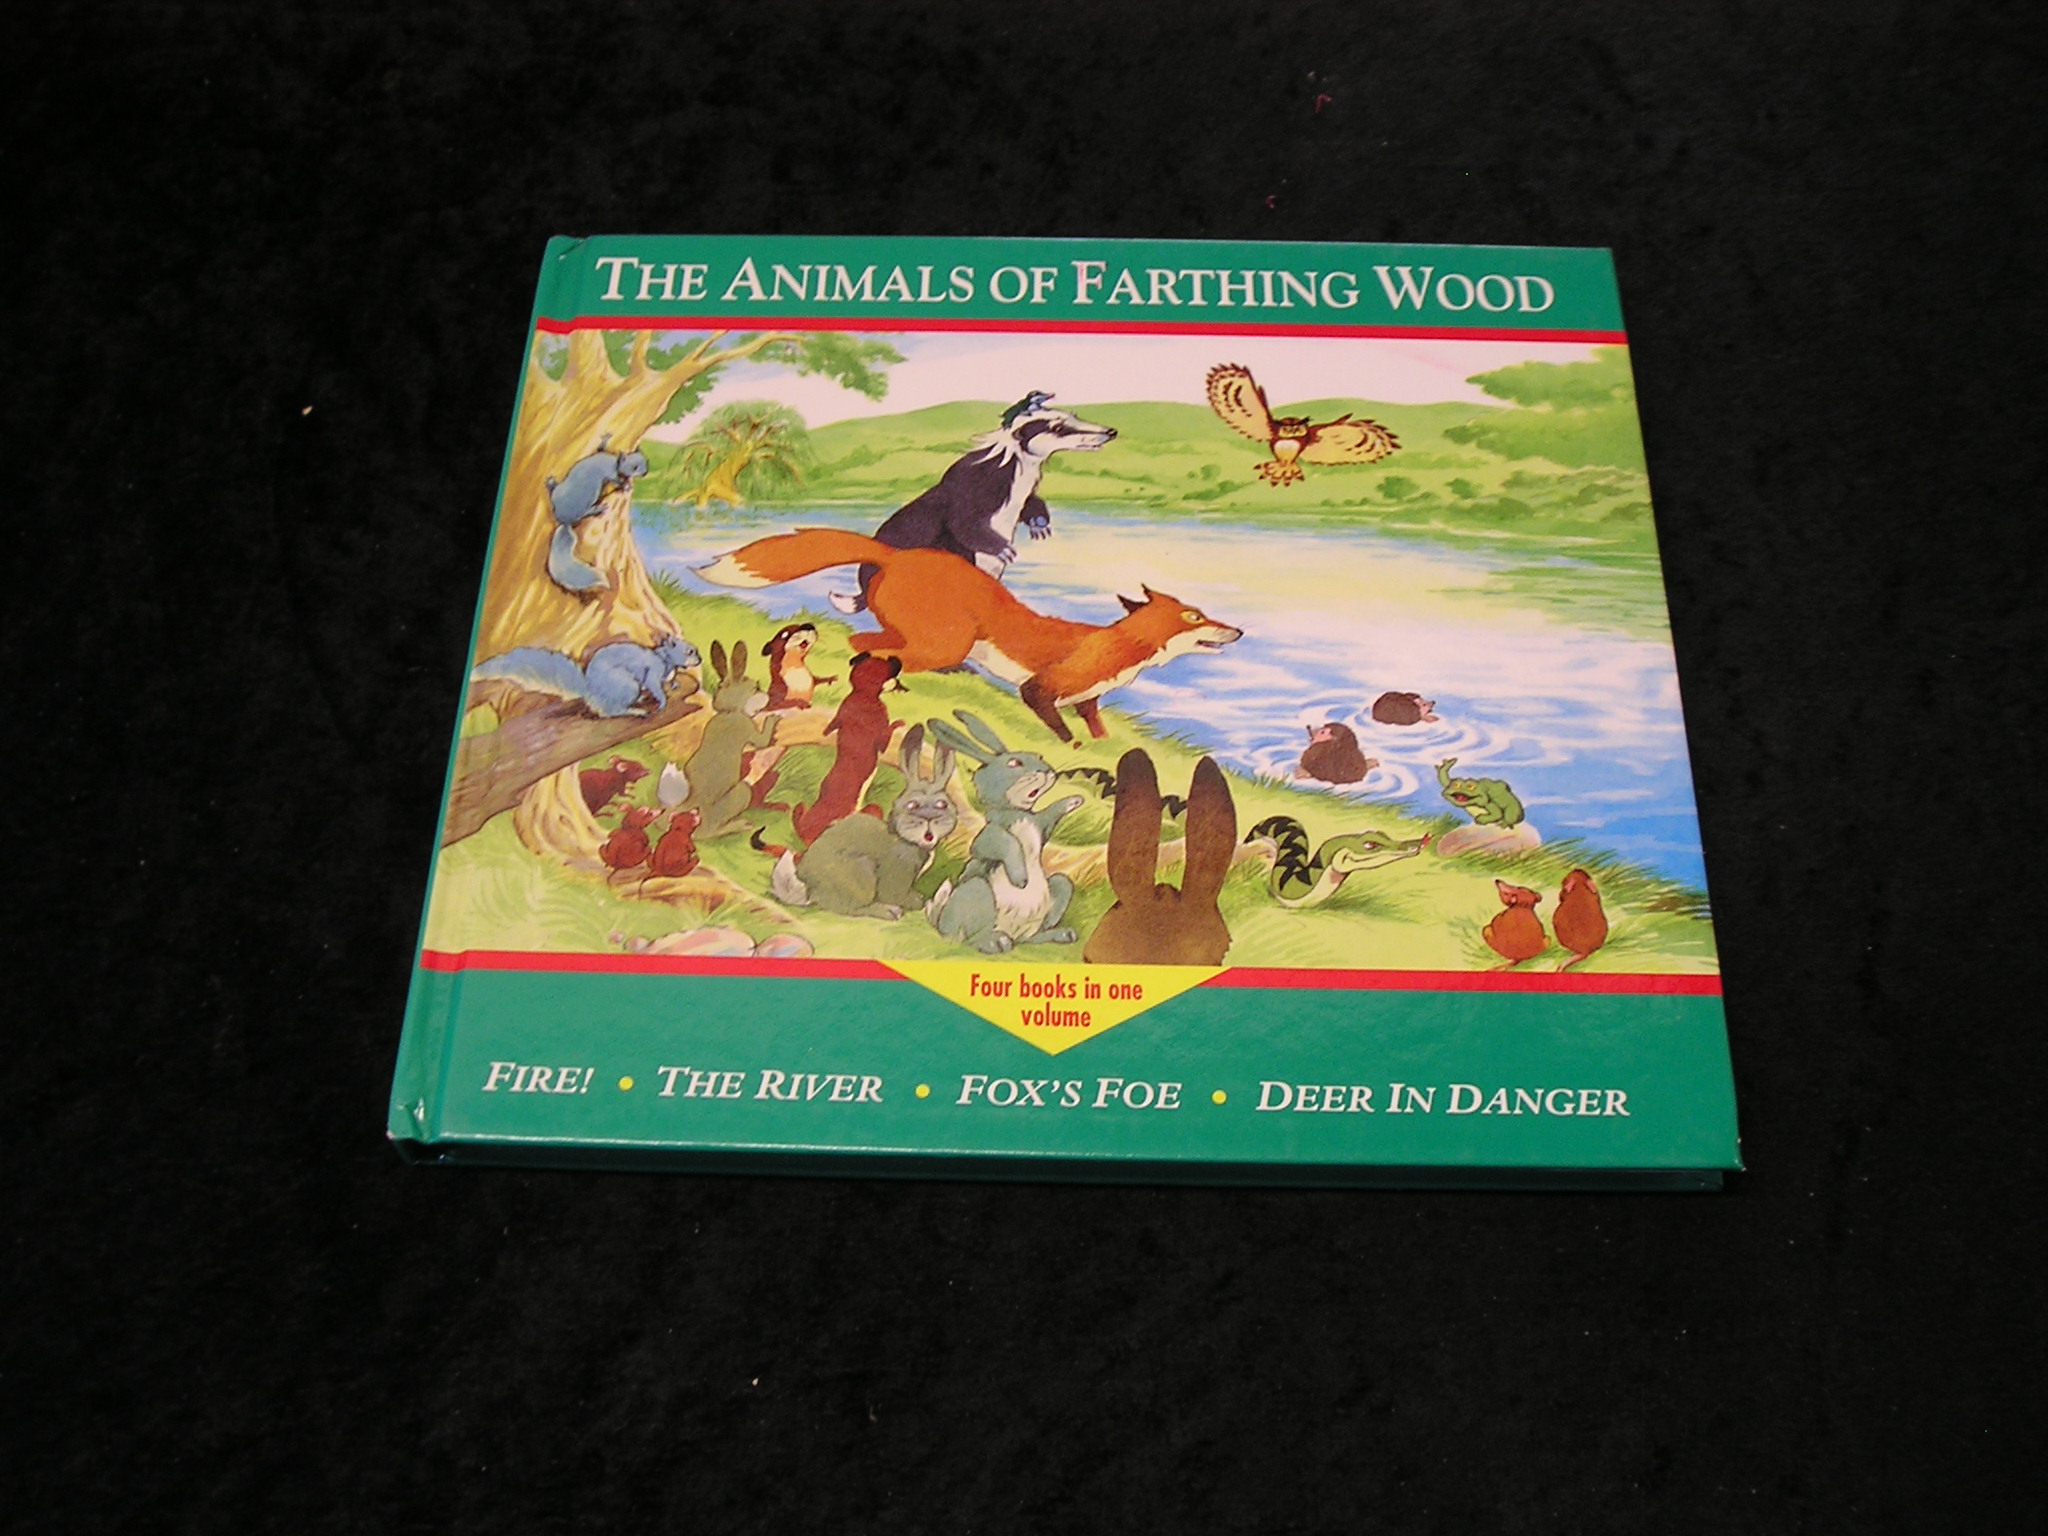 Image 0 of The Animals of Farthing Wood: Fire, The River, Fox's Foe, Deer in Danger